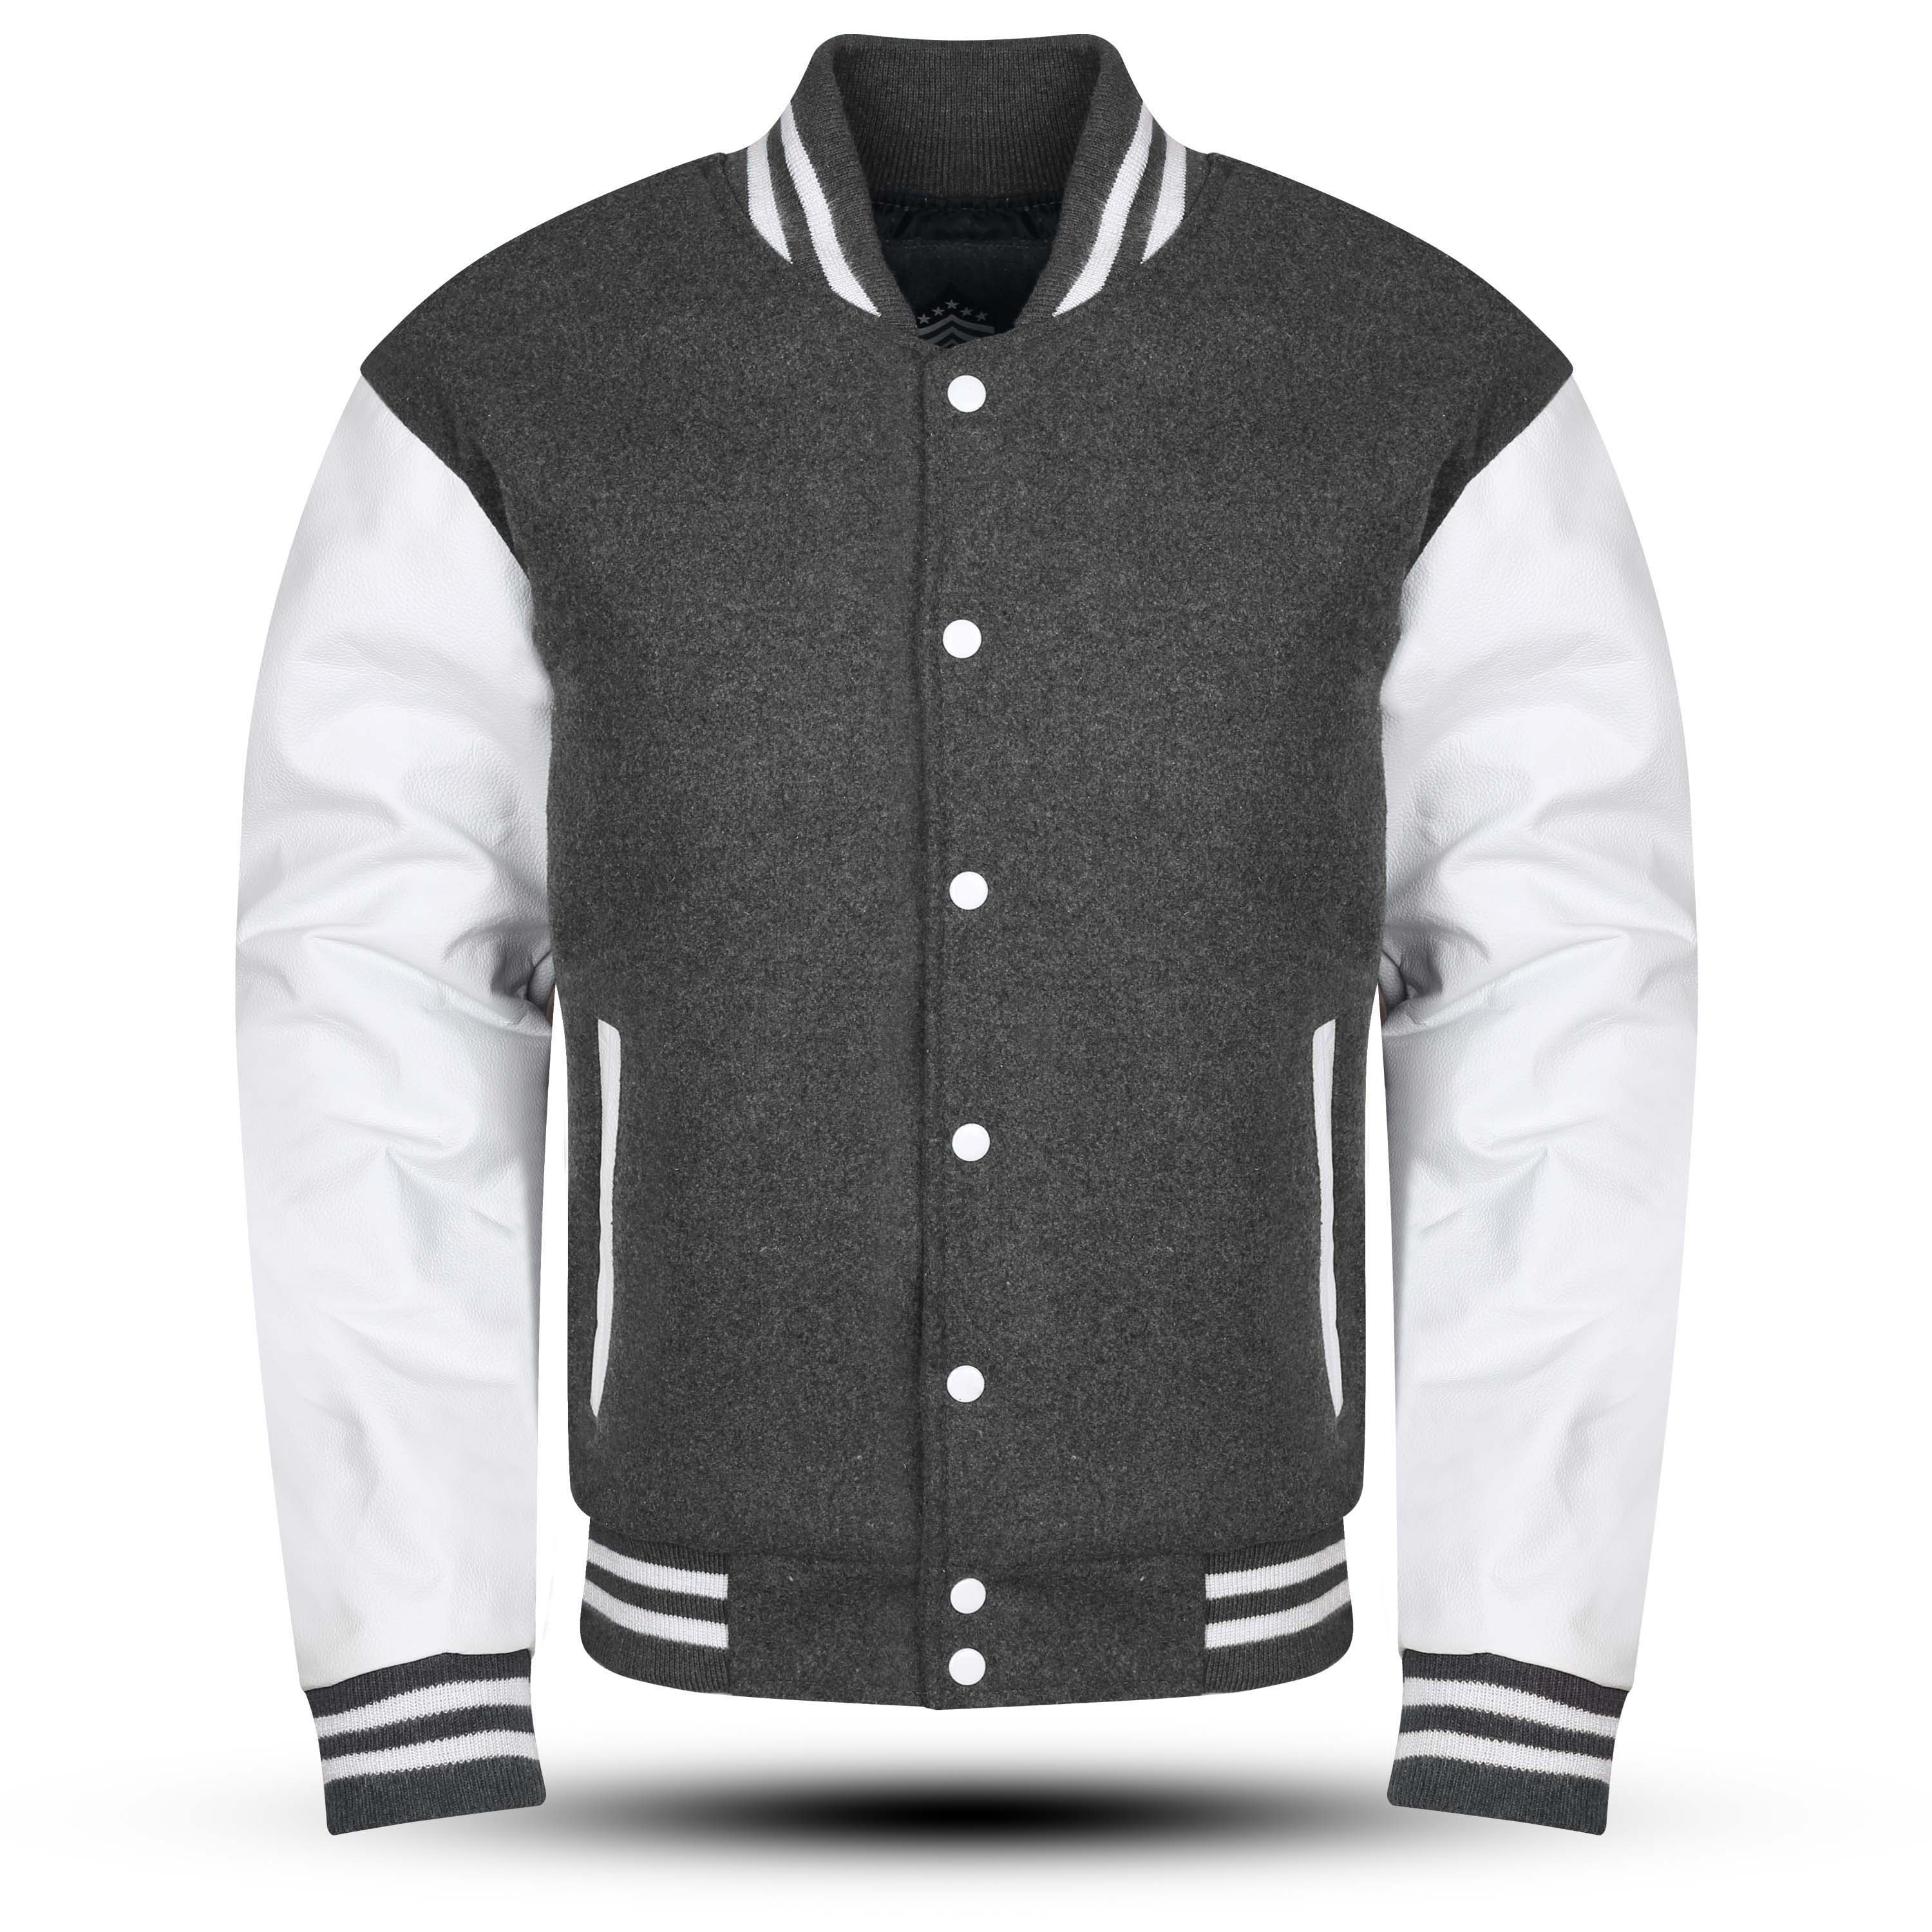 Varsity Jacket with Dark Slate Gray Wool Body and White Leather Sleeves ...